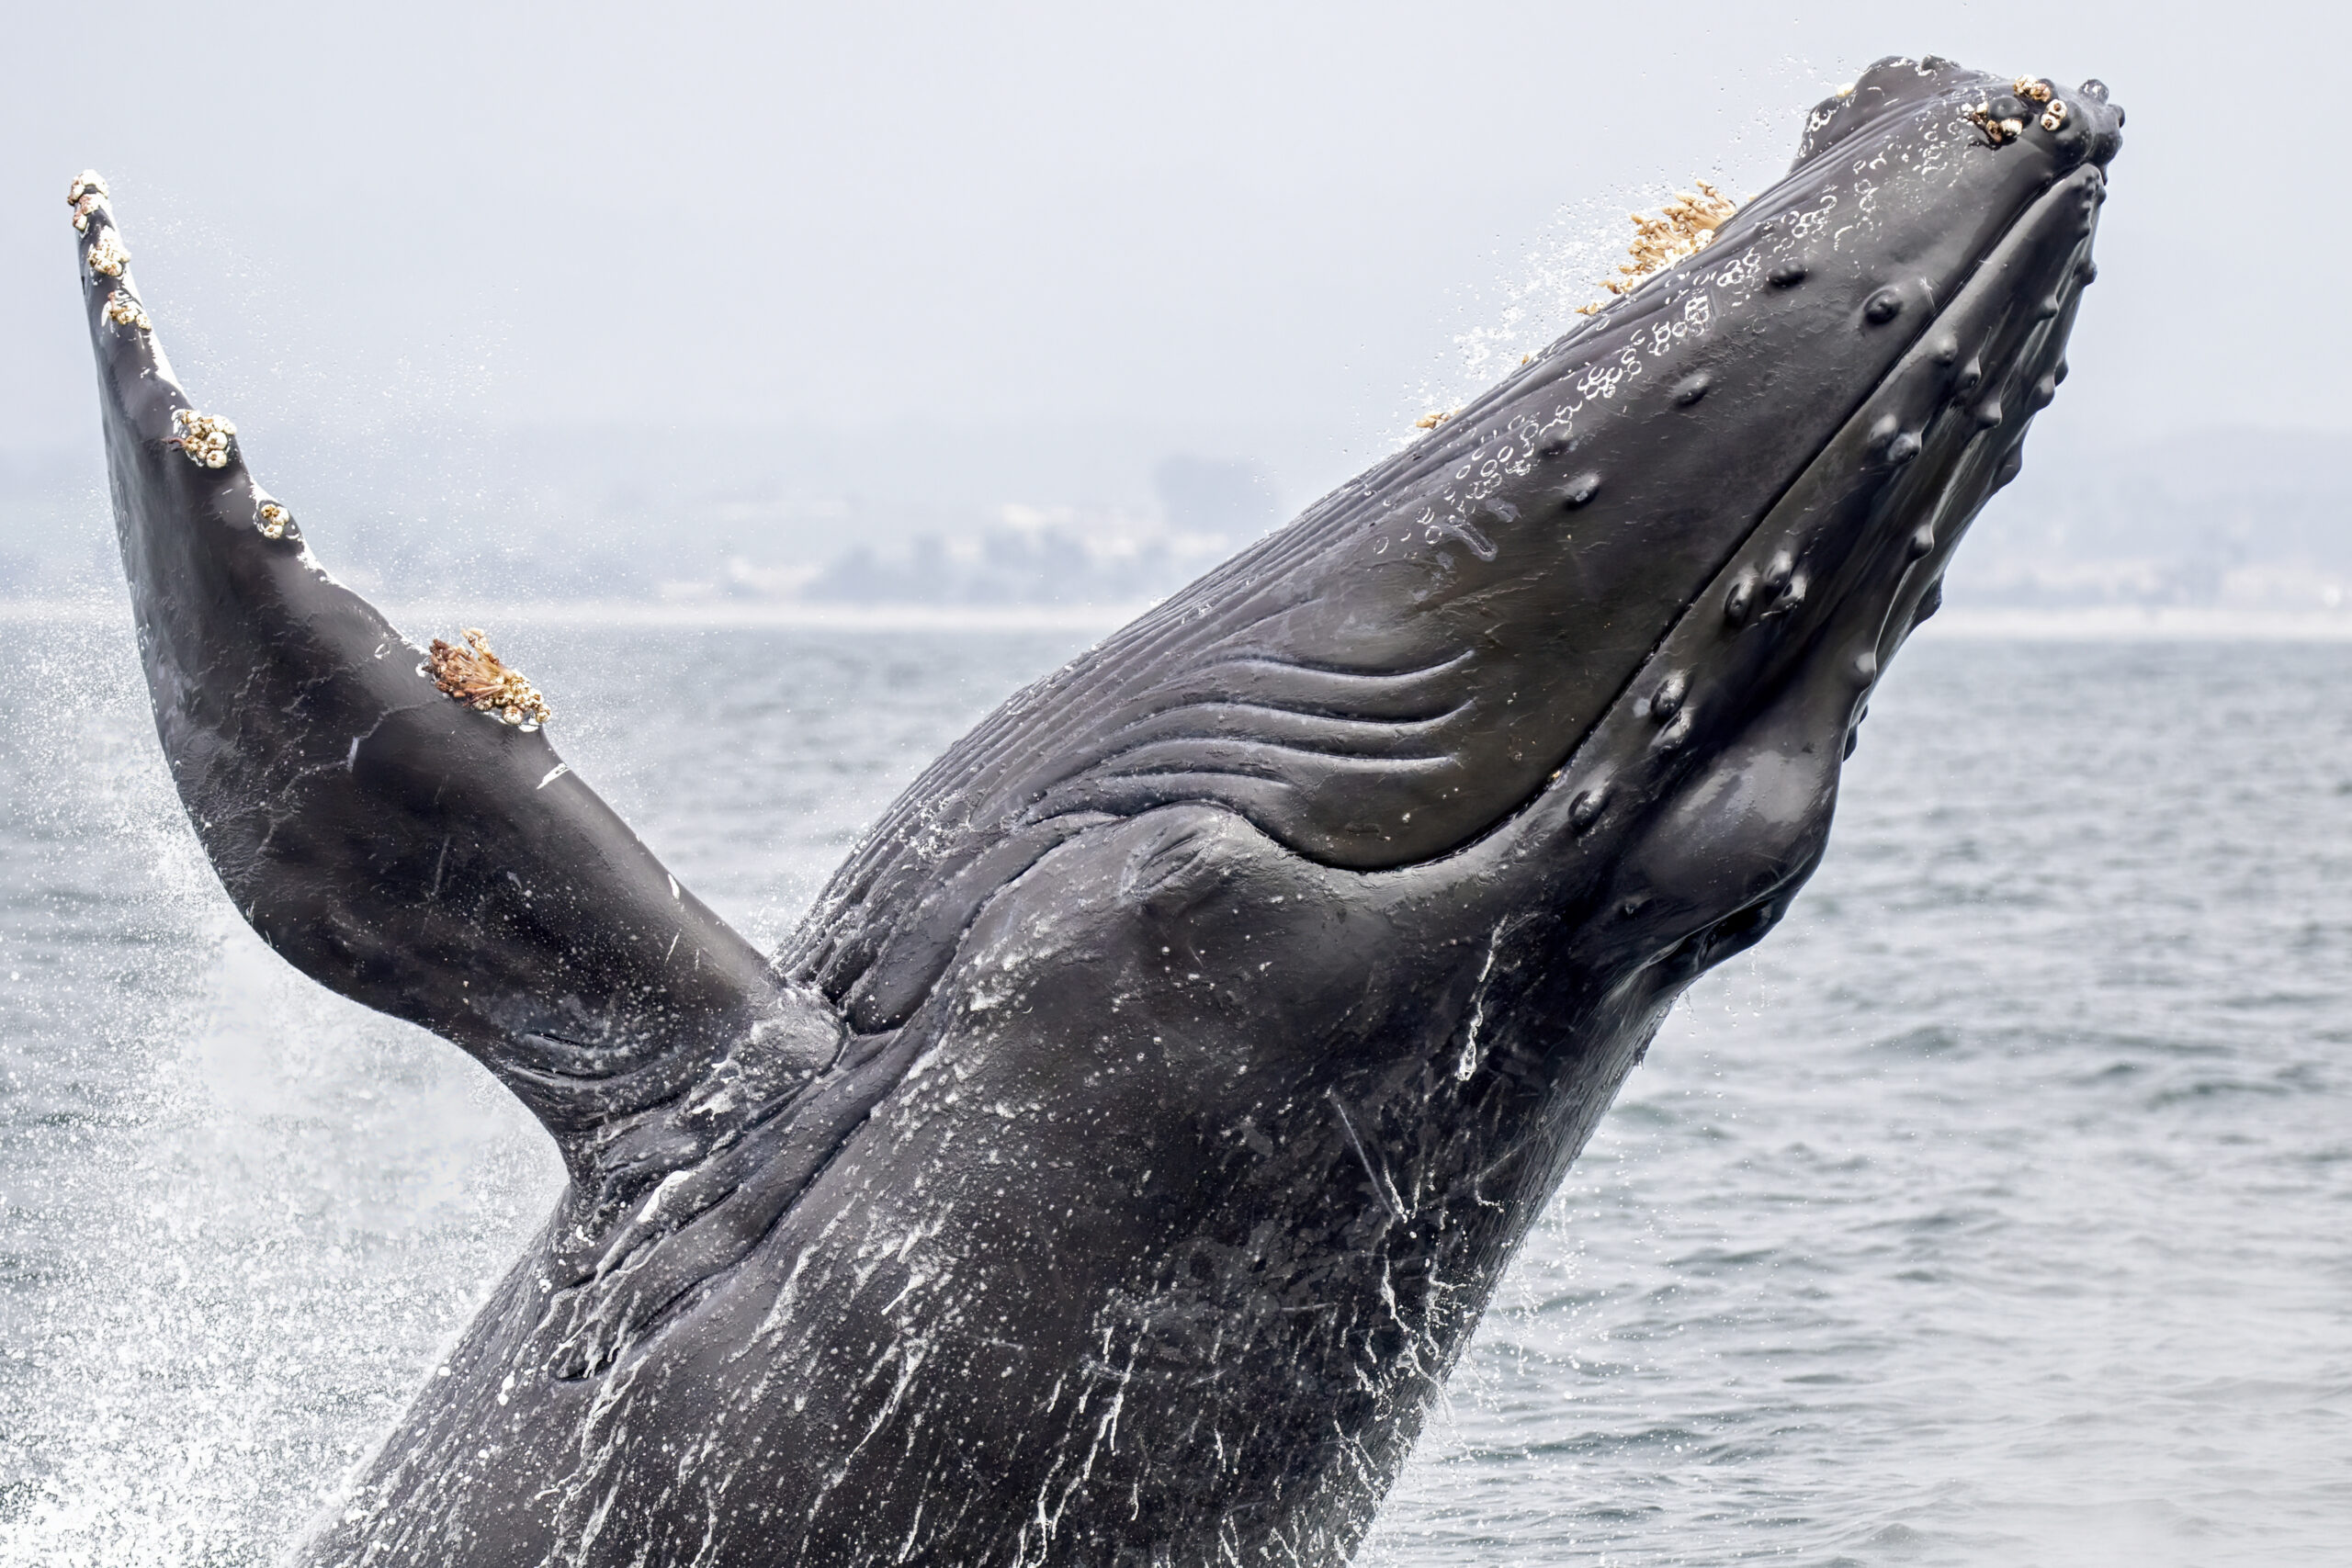 Are humpback whales really not threatened anymore?